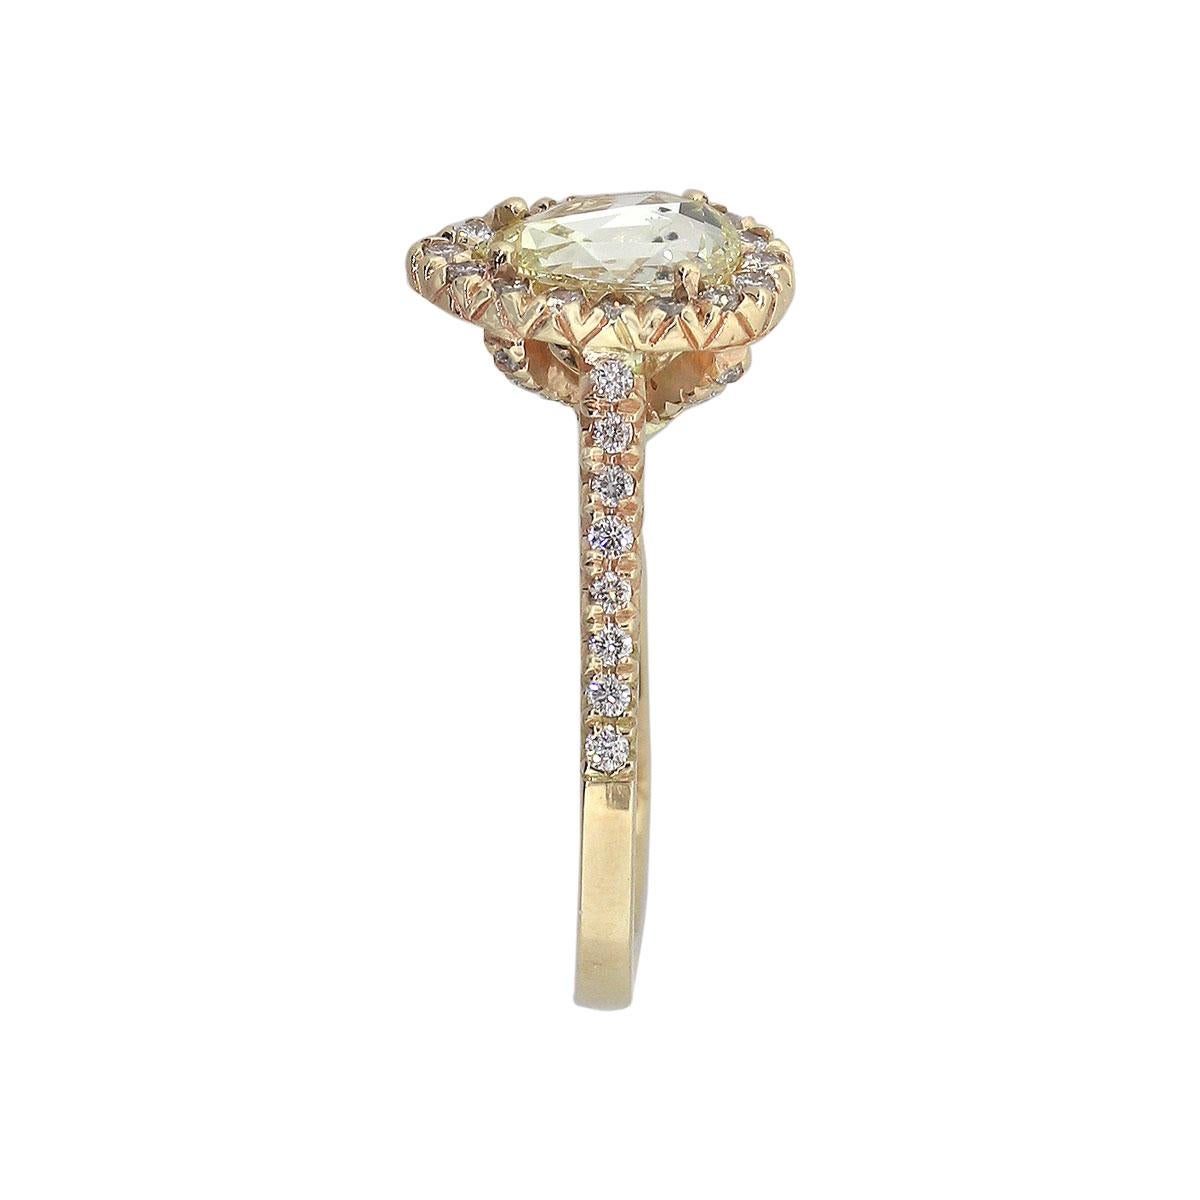 Material: 14k Yellow Gold
Center Diamond Details: Approx. 0.89ct Pear shape diamond. Diamond is Fancy Light Yellow in color and VS in clarity. GIA 5192190513
Adjacent Diamond Details: Approx. 0.50 of round cut diamonds. Diamonds are G/H in color and